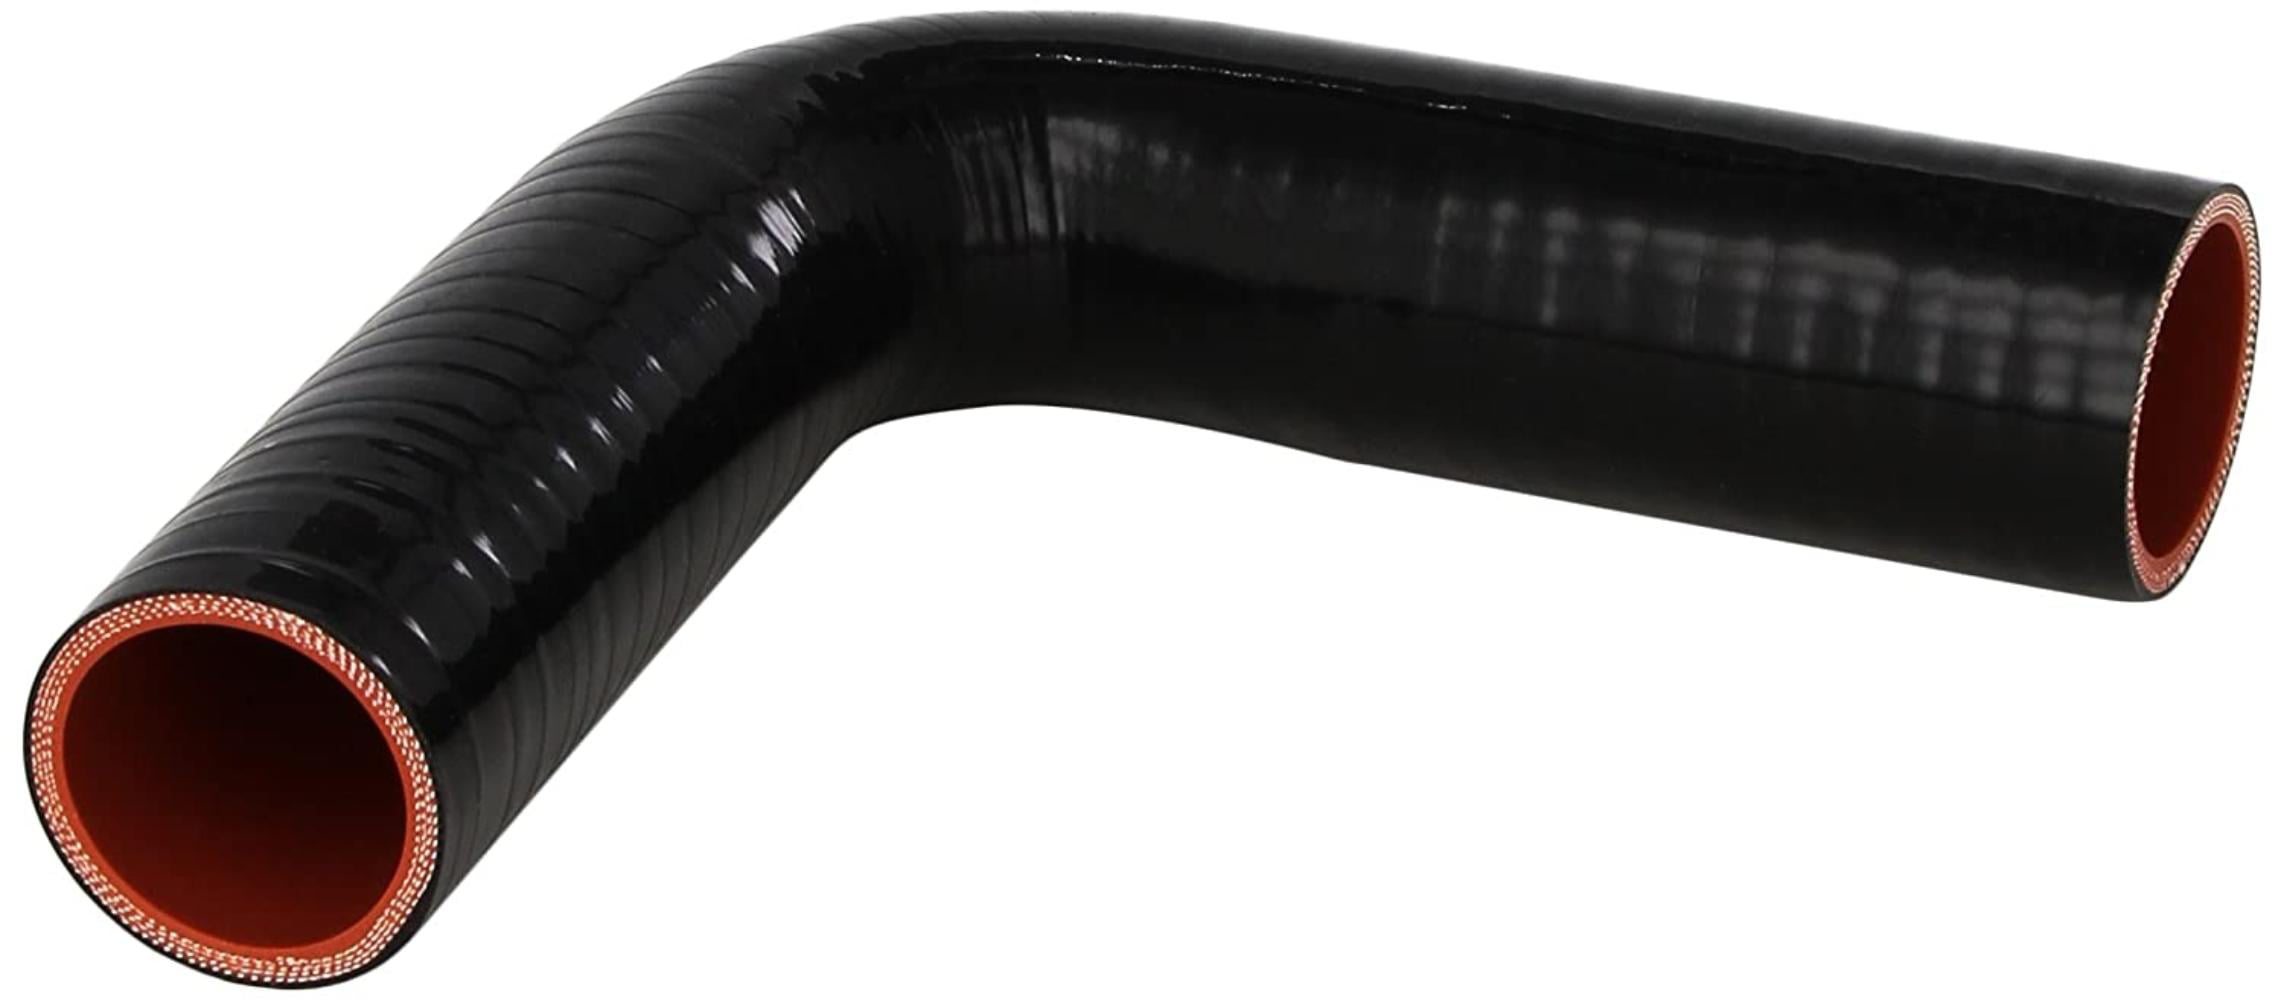 4 Leg Length on each side 1-1/2 ID HPS HTSEC90-150-BLK Silicone High Temperature 4-ply Reinforced 90 degree Elbow Coupler Hose 75 PSI Maximum Pressure Black 